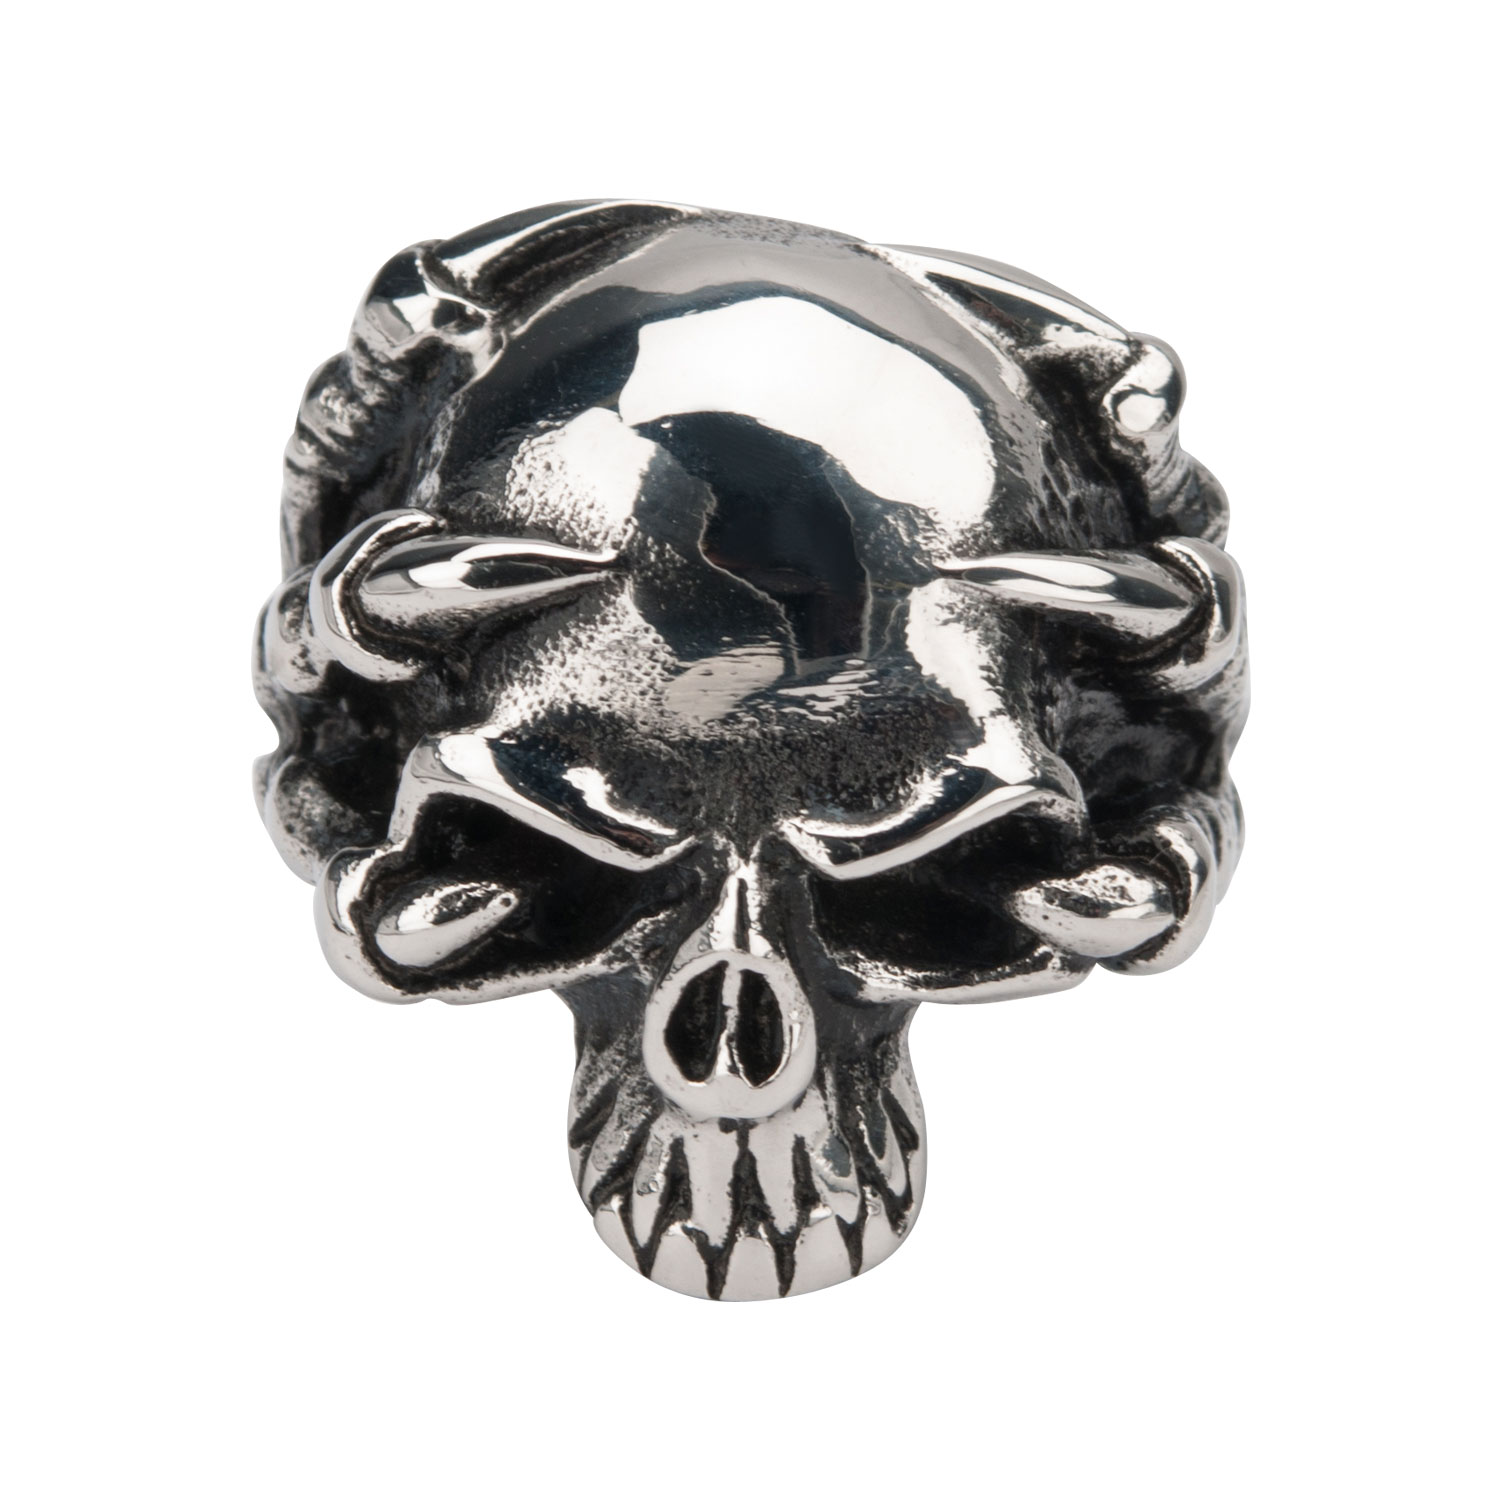 Black Oxidized Skull Ring with Claws Image 2 Spath Jewelers Bartow, FL